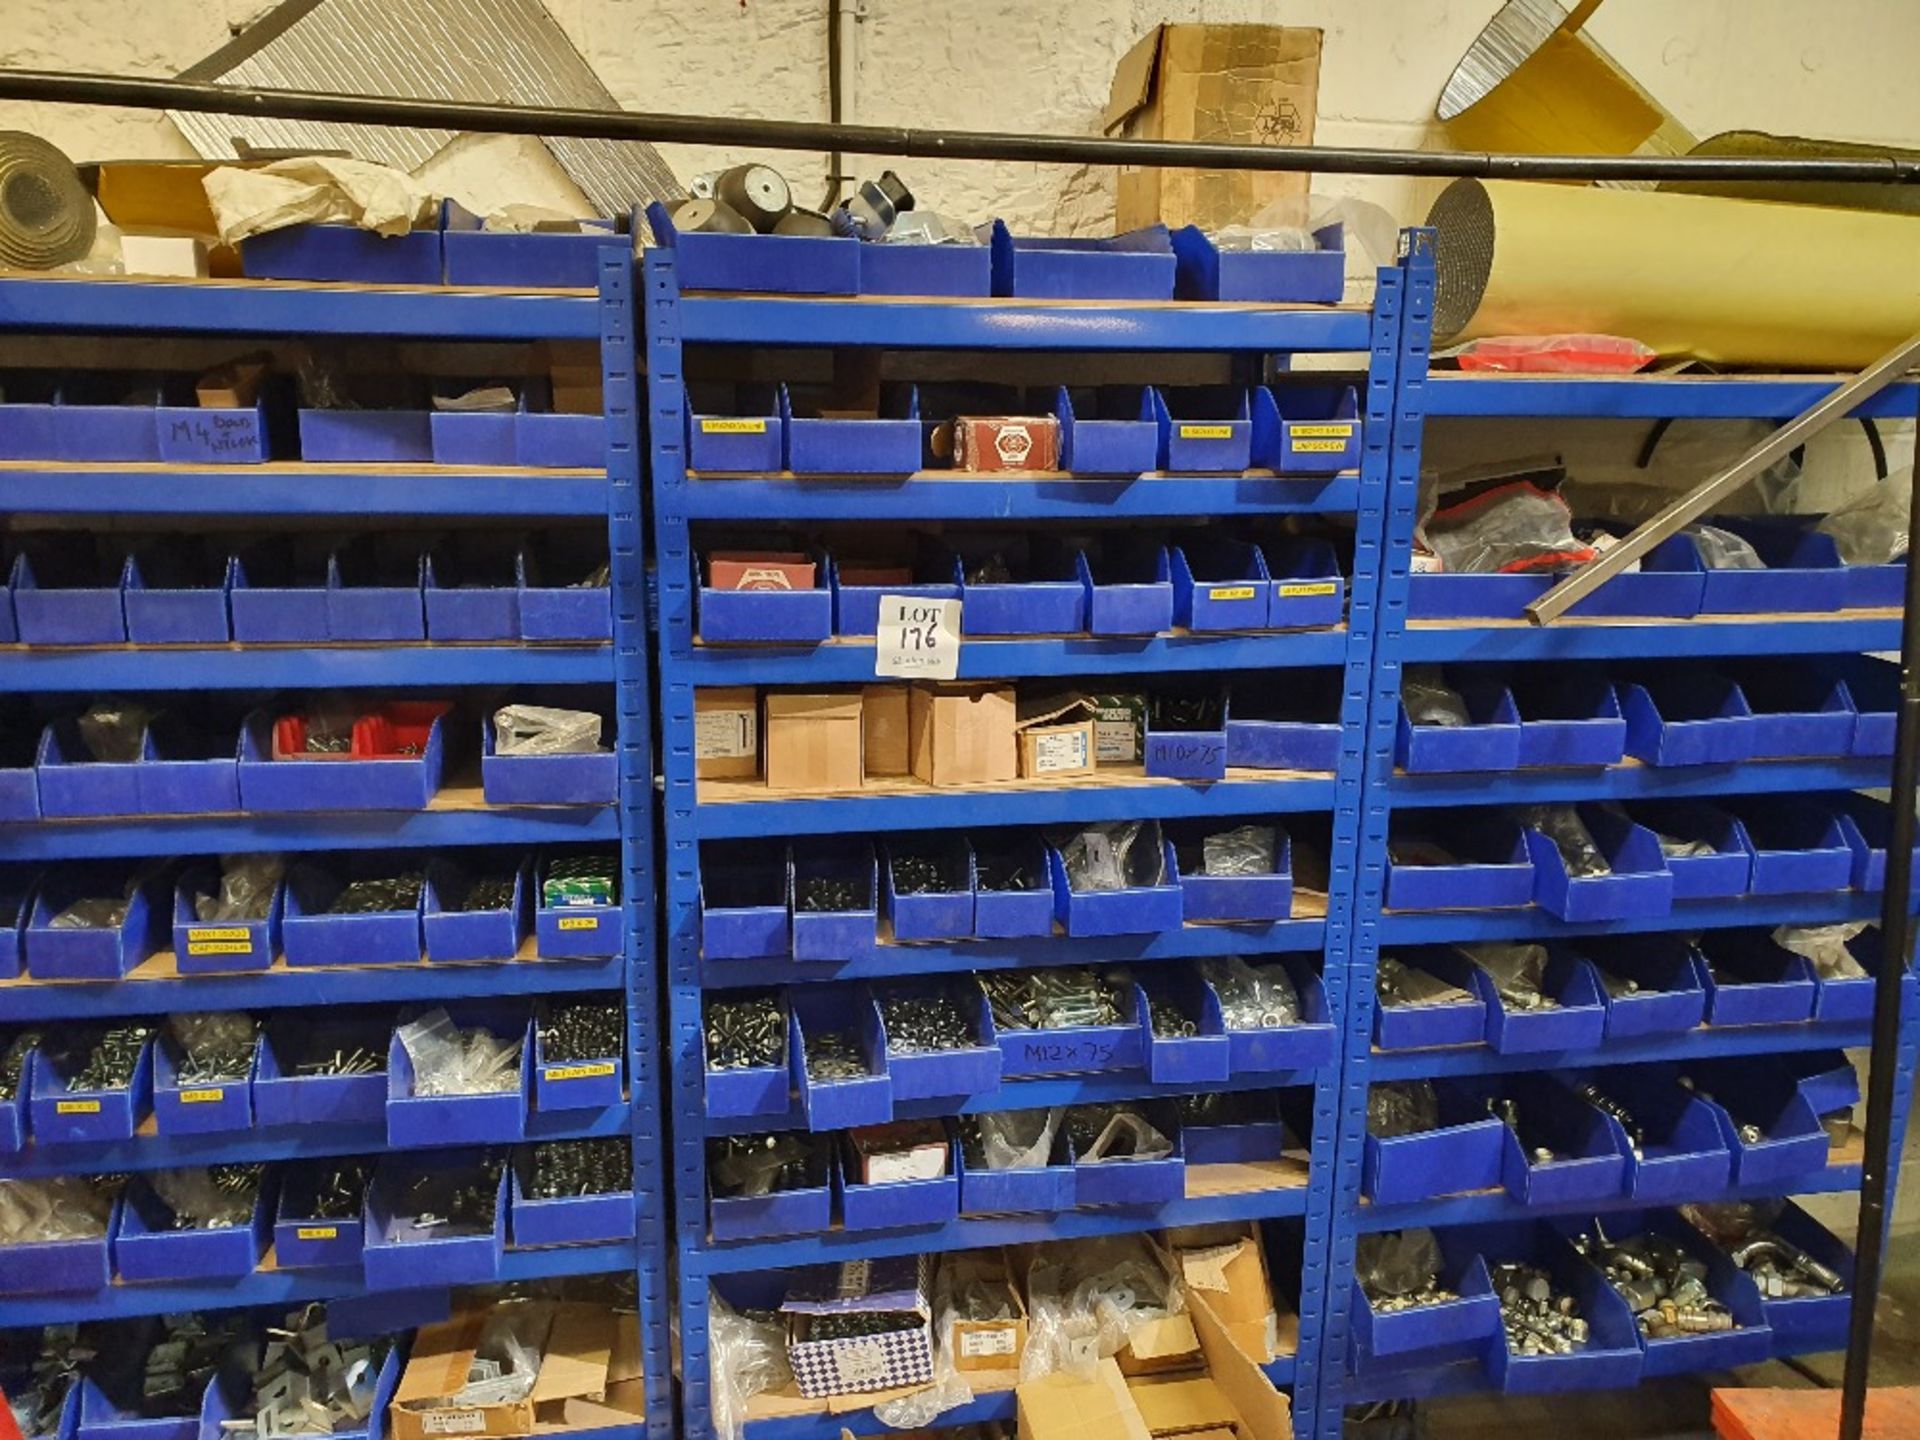 3 - bays of racking containing various bolts and pressure fittings